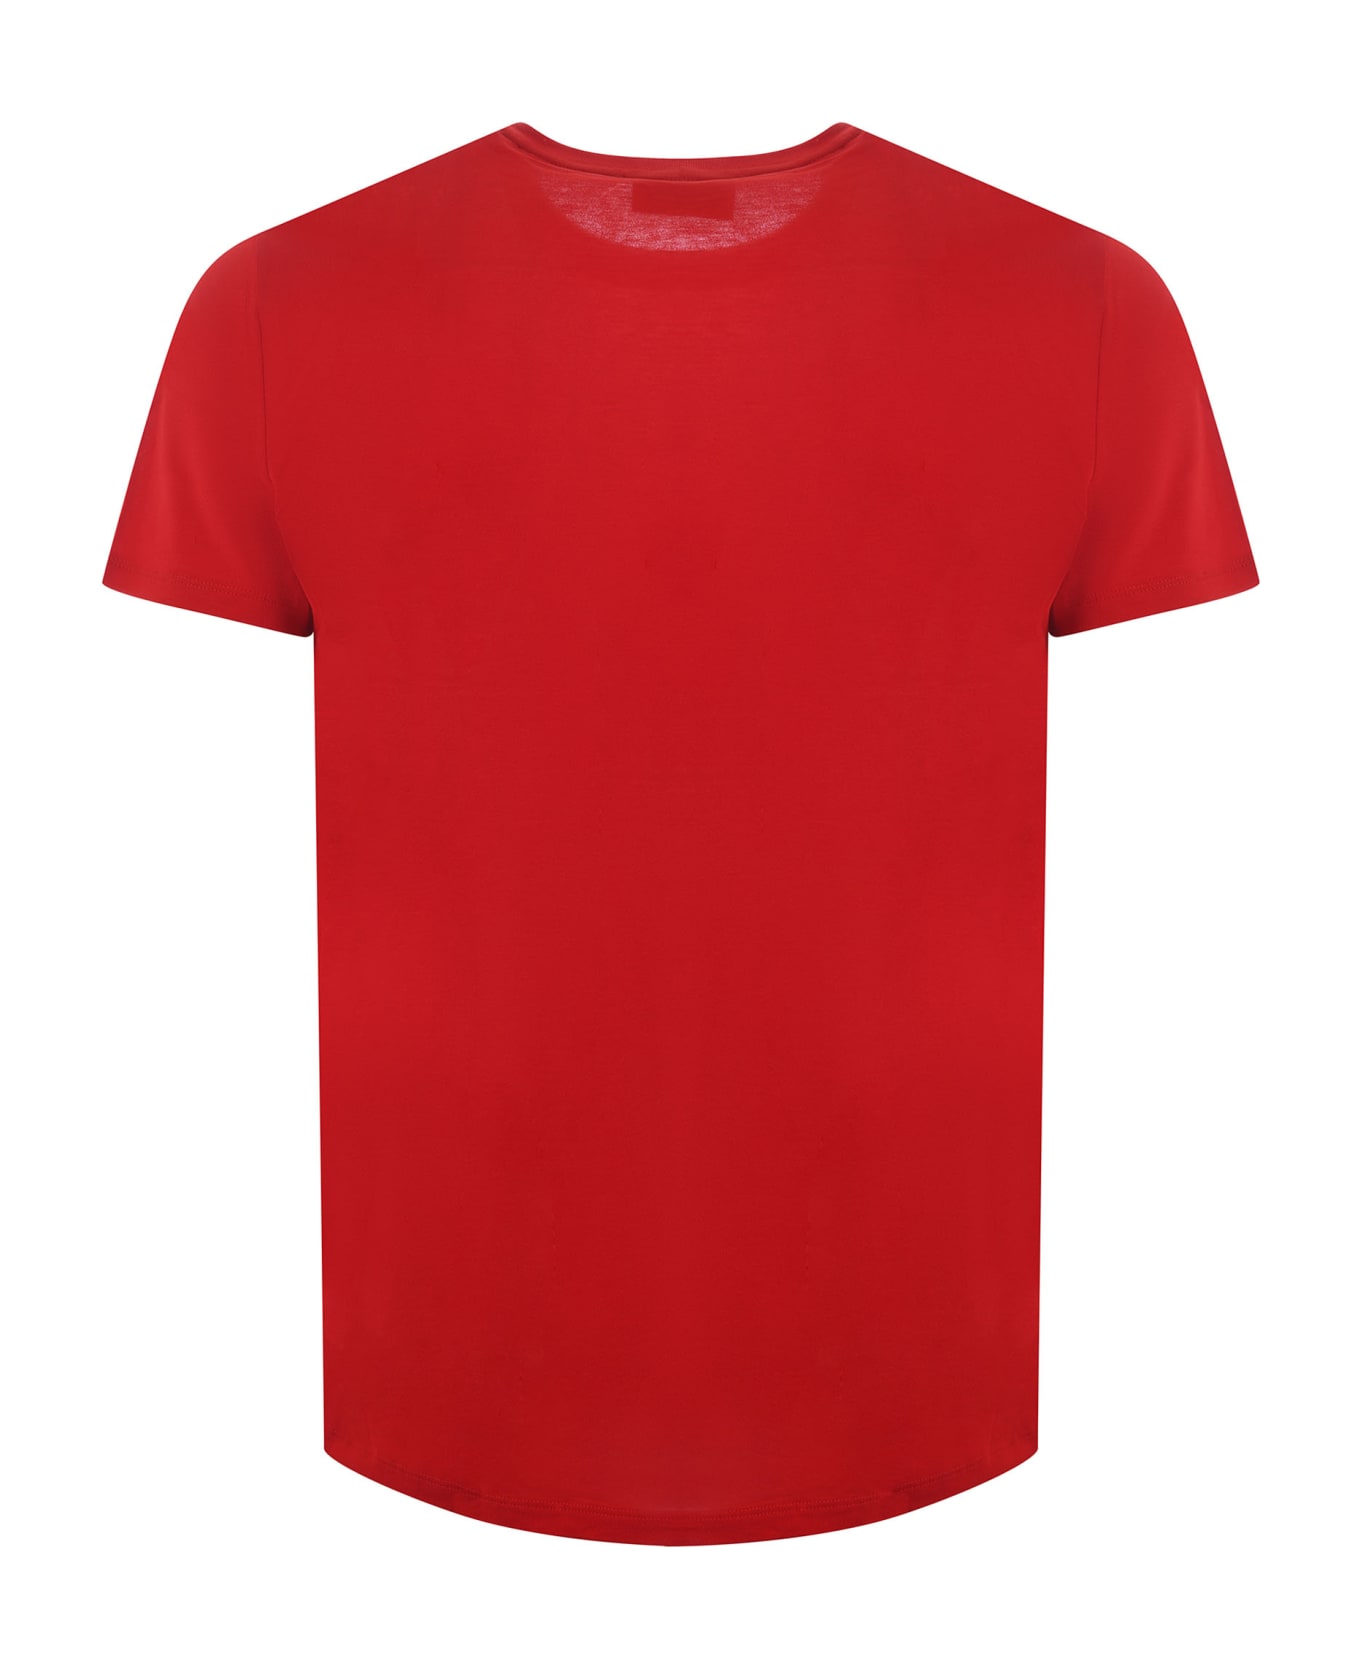 Lacoste T-shirt - Rosso